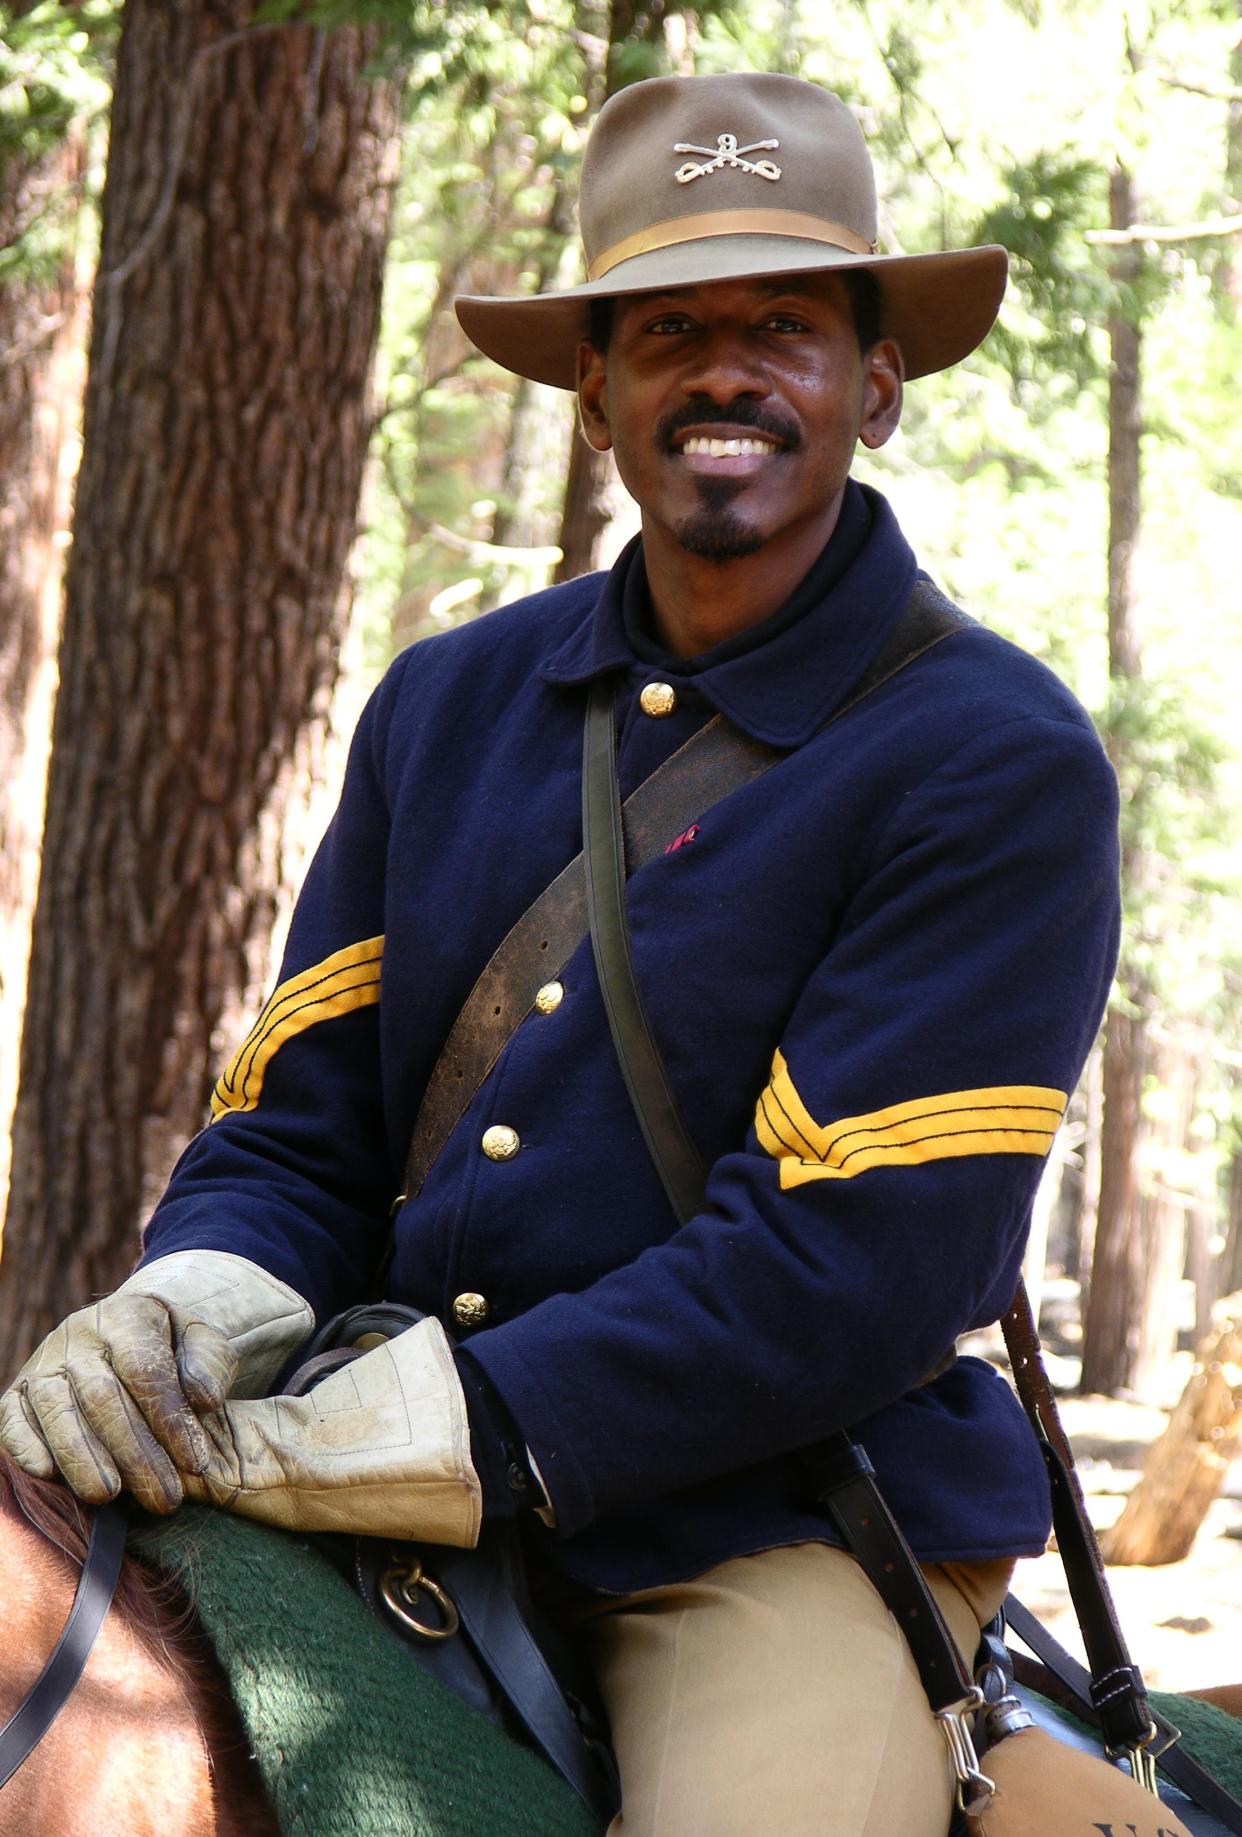 Yosemite National Park ranger Shelton Young leads living history programs about Buffalo Soldiers at the park. His father was a Buffalo Soldier.